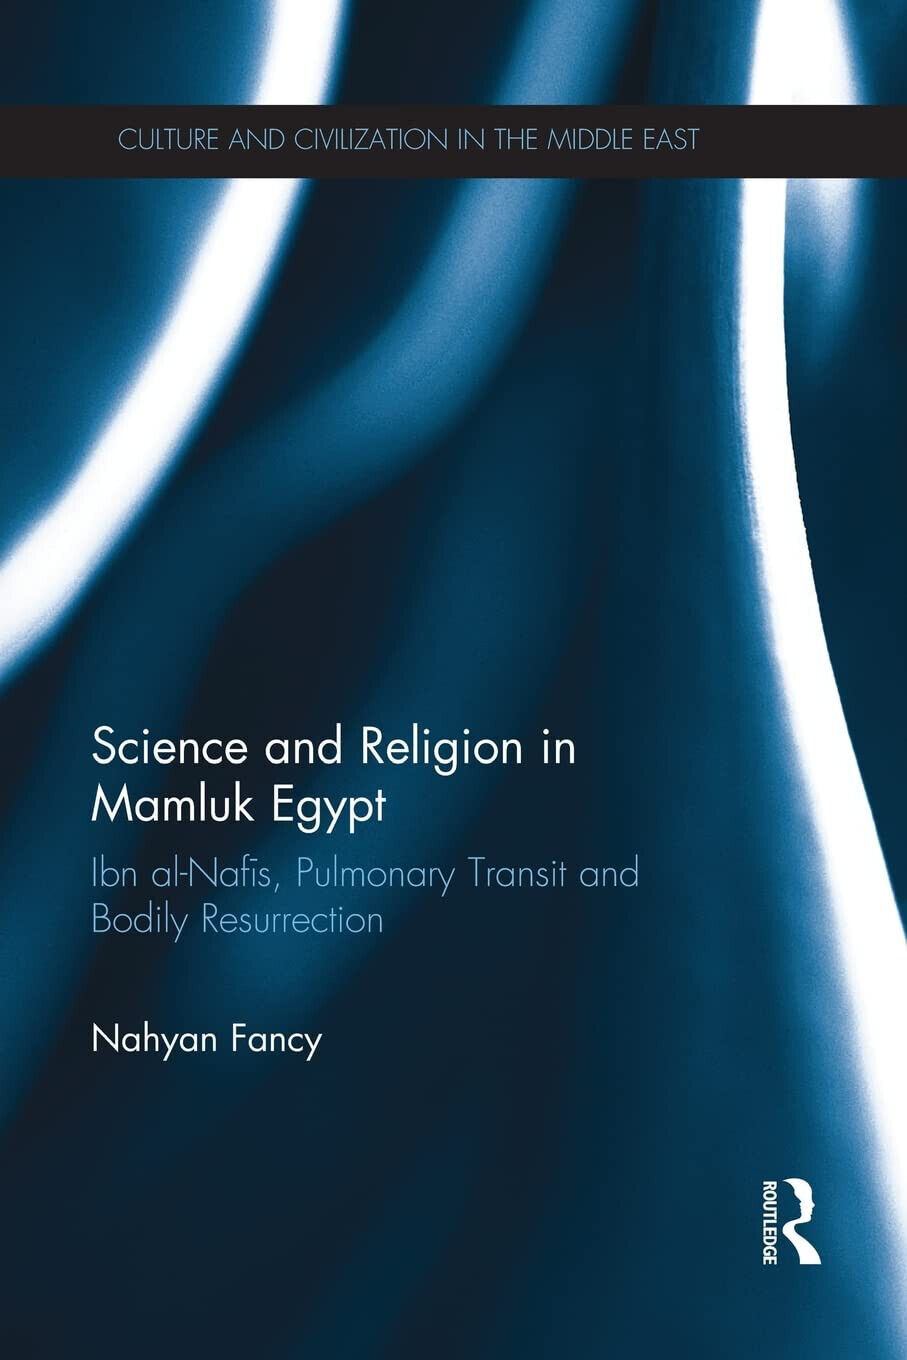 Science and Religion in Mamluk Egypt - Nahyan A. G. Fancy - Routledge, 2015